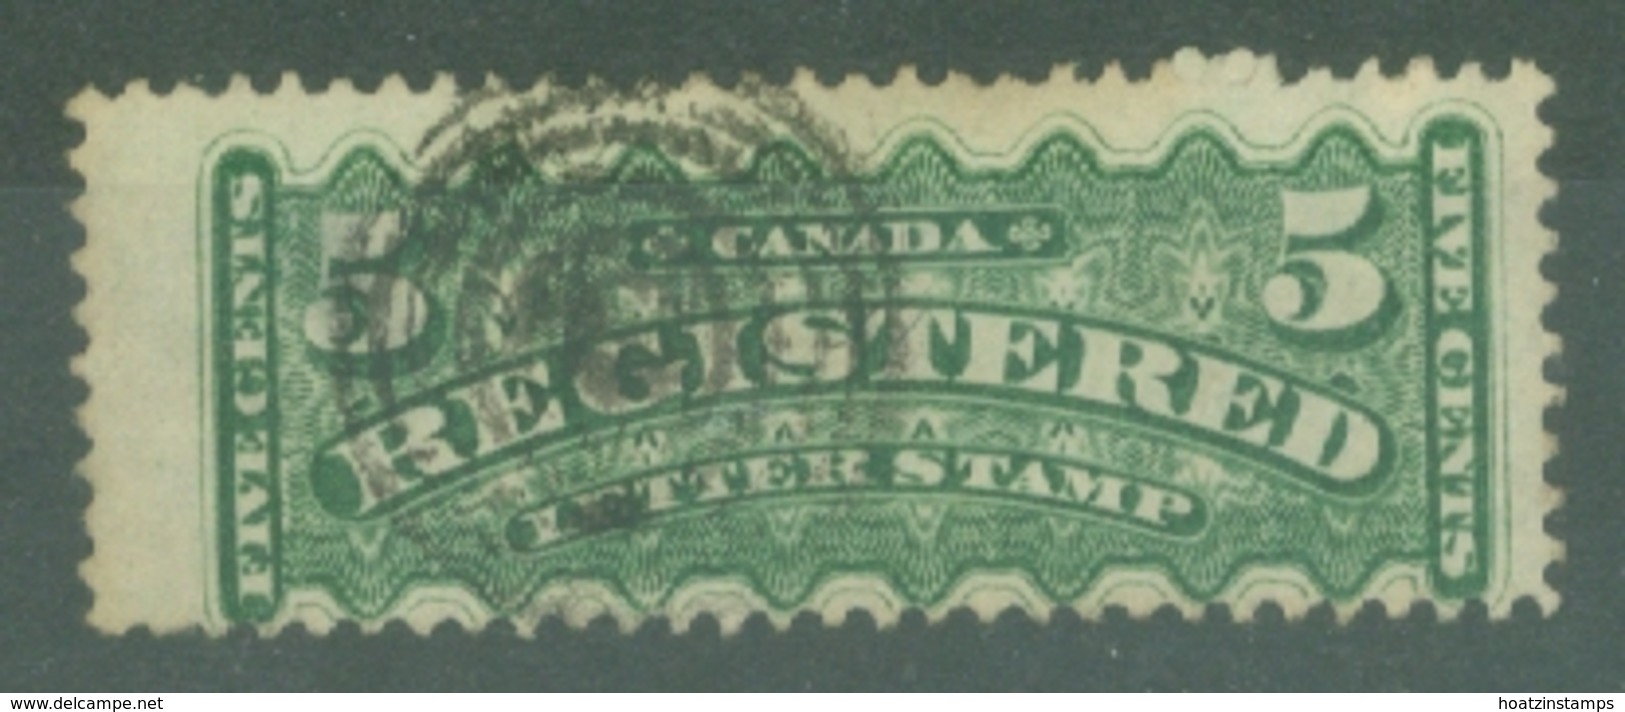 Canada: 1875/92   Registration Stamp   SG R7a    5c   Dull Sea-green   Used - Recomendados